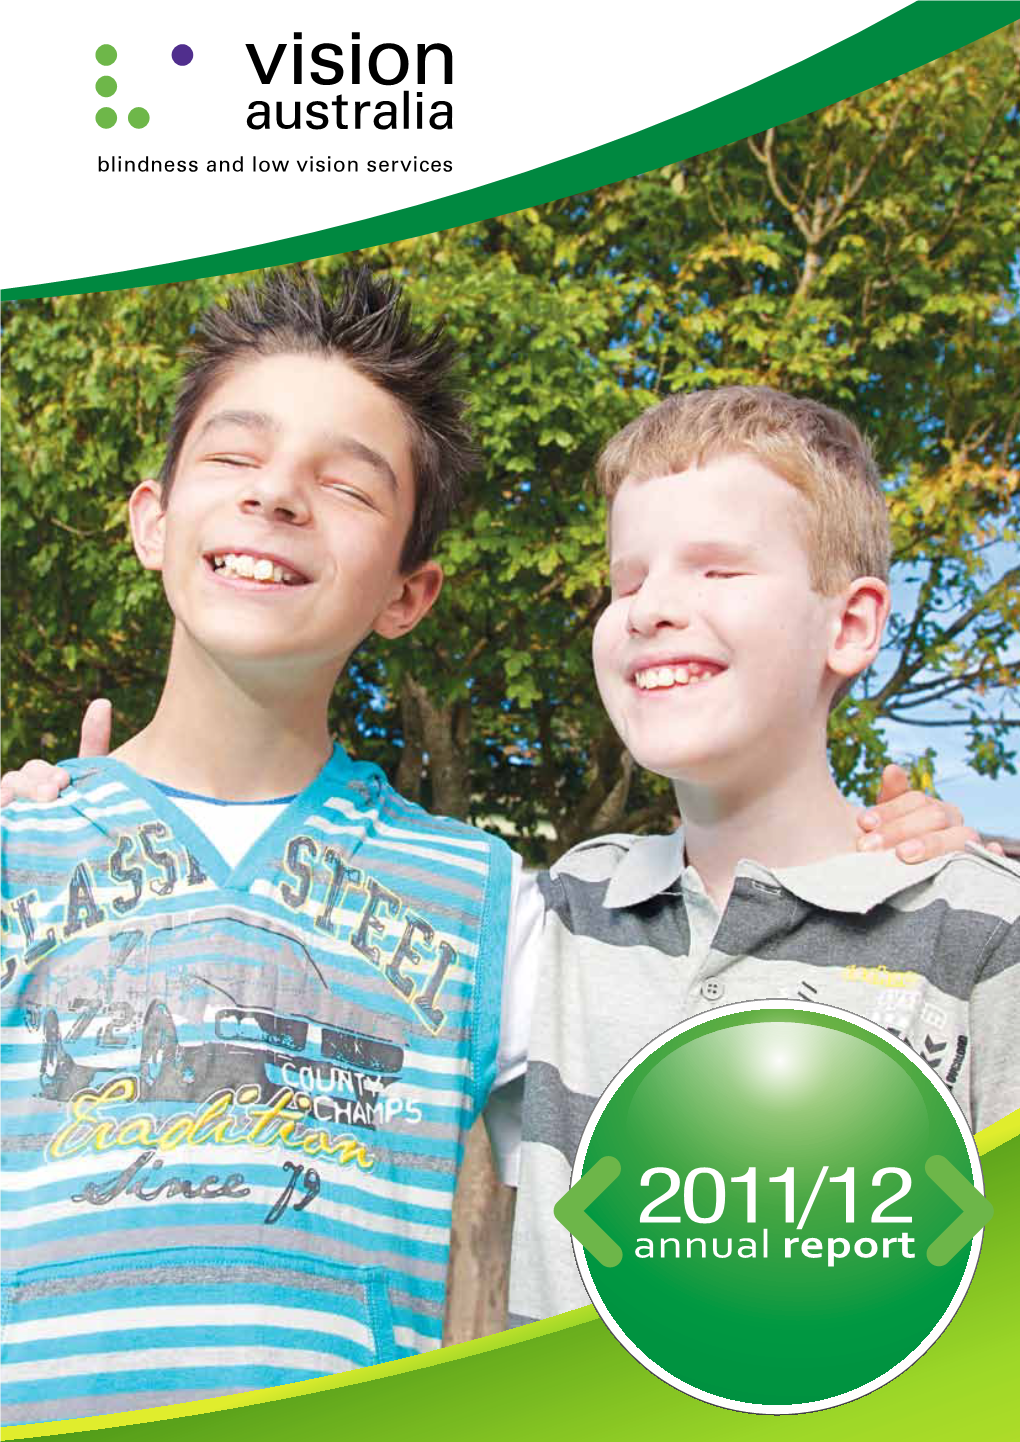 2011/12 Annual Report Annual Report Our Vision Vision Australia Is a Partnership Between People Who Are Blind, Sighted Or Have Low Vision